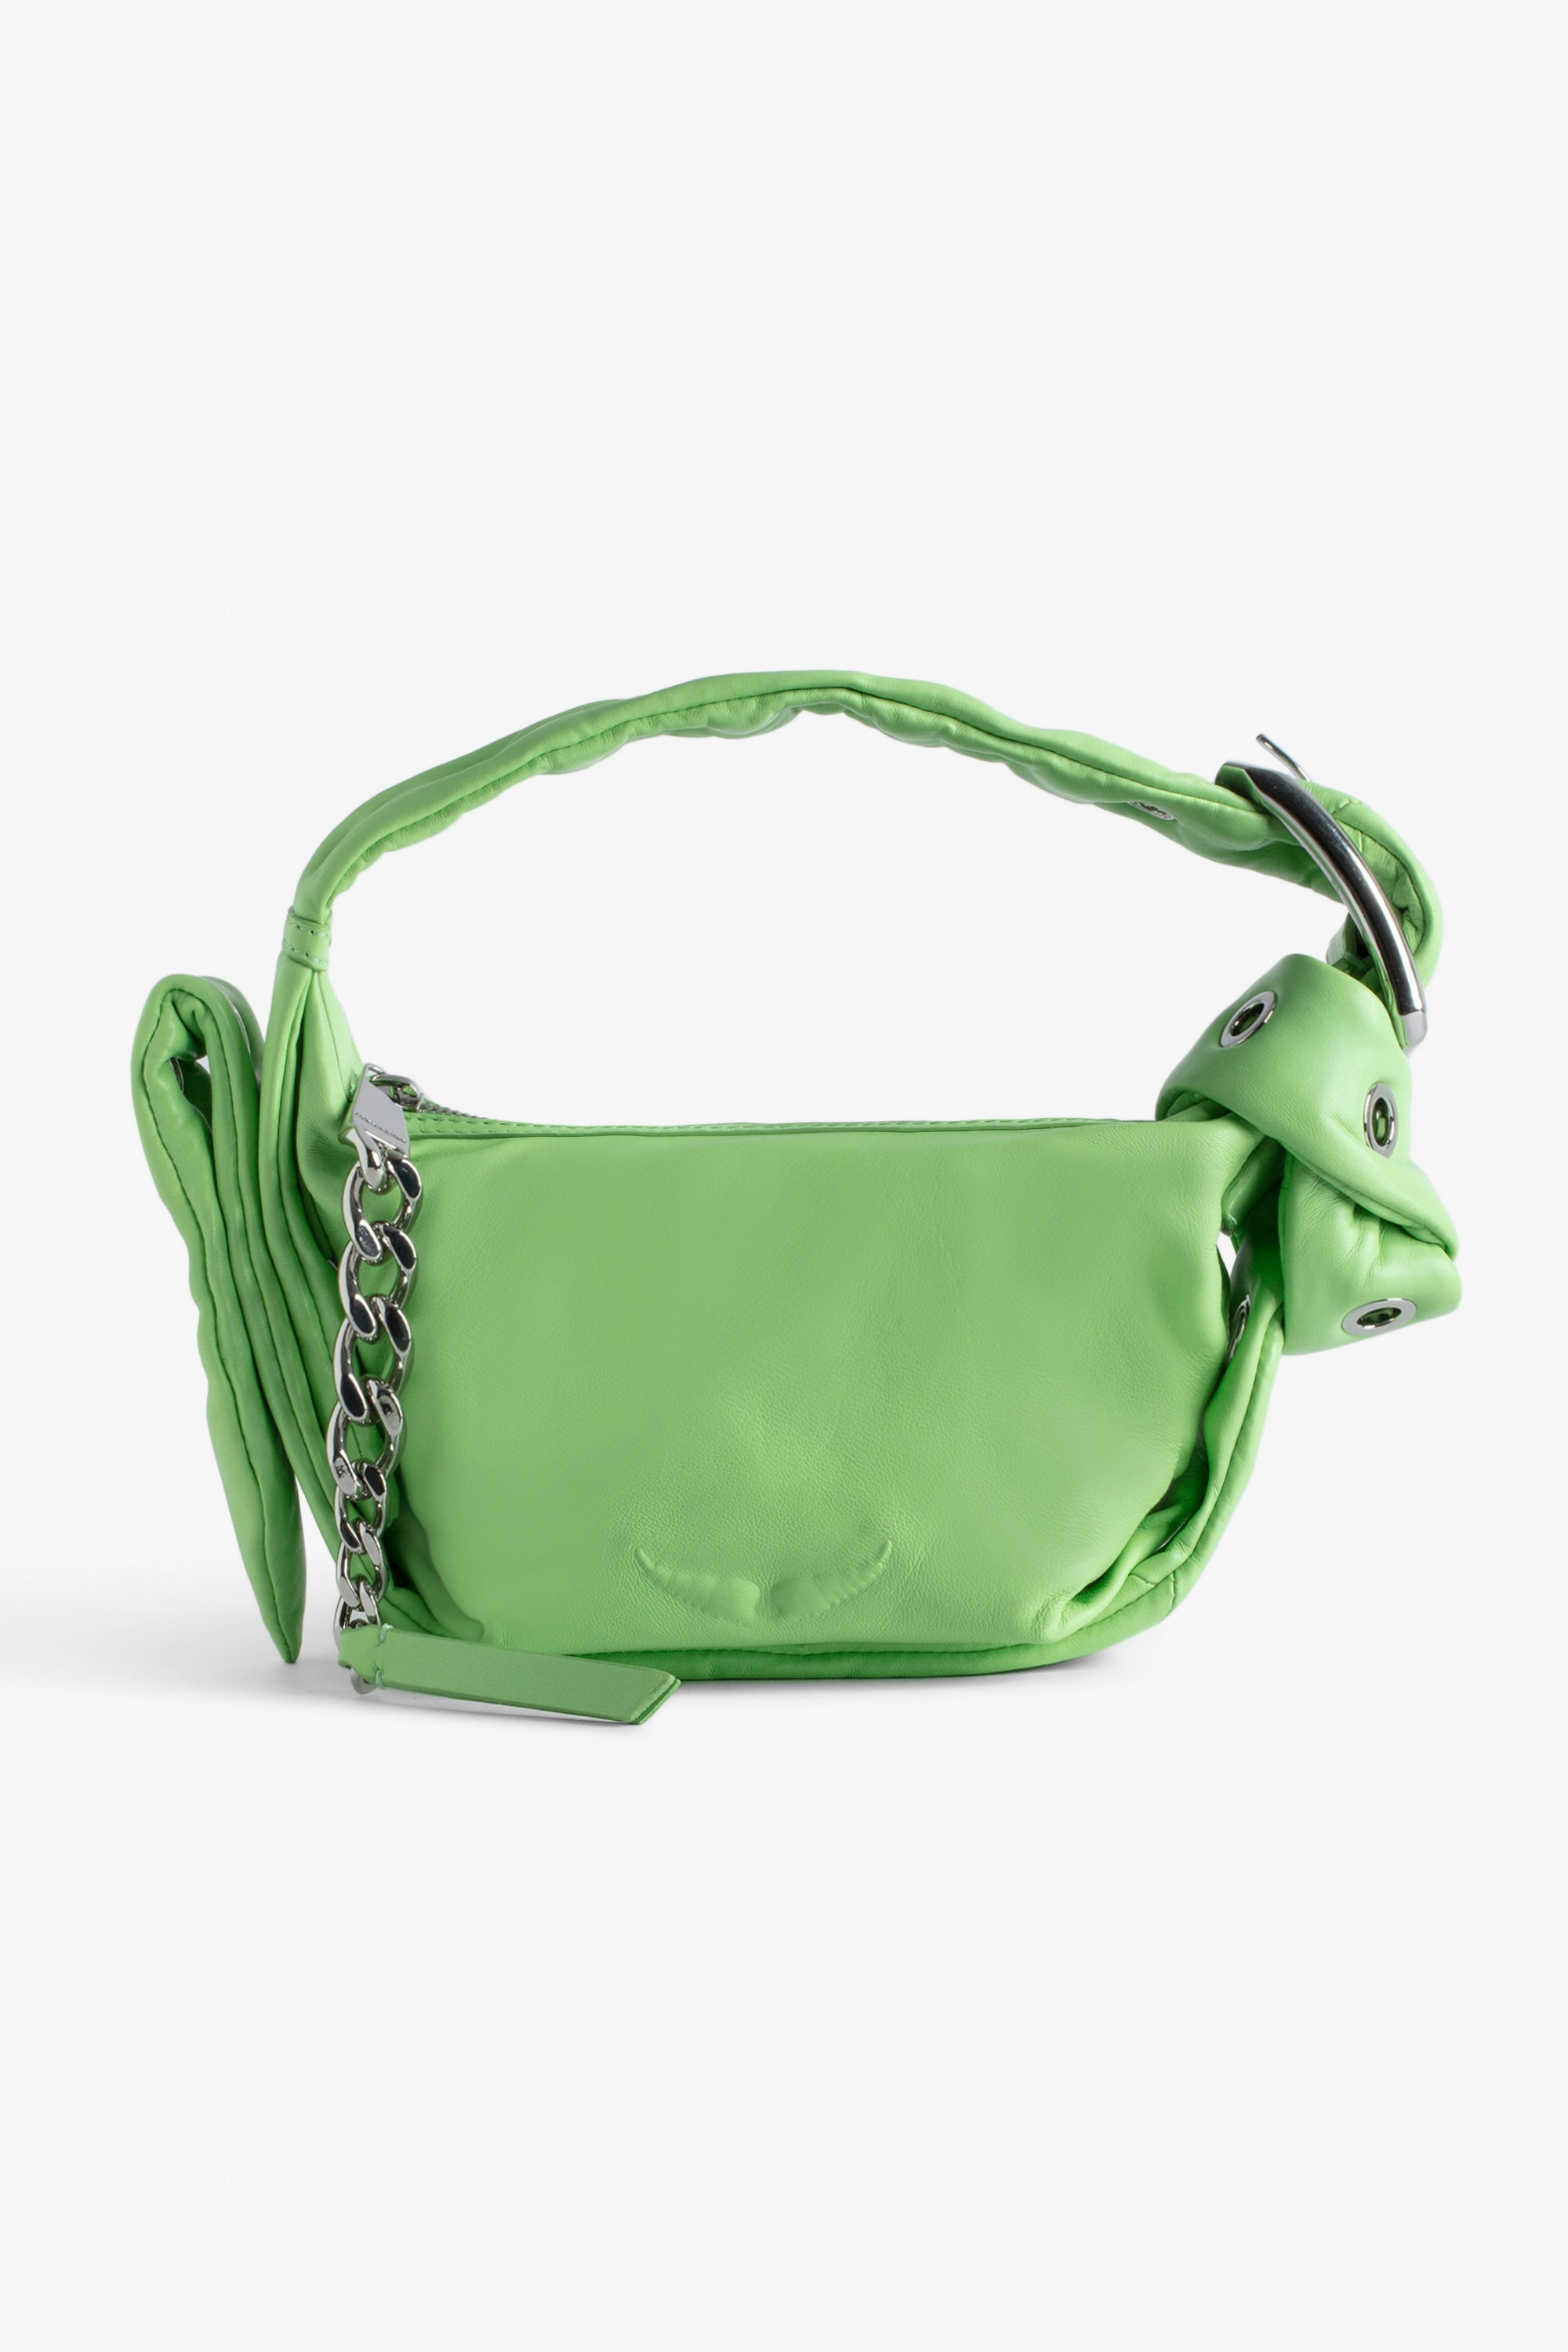 Le Cecilia XS Obsession Bag Women’s small green smooth leather bag with shoulder strap and metal C buckle.